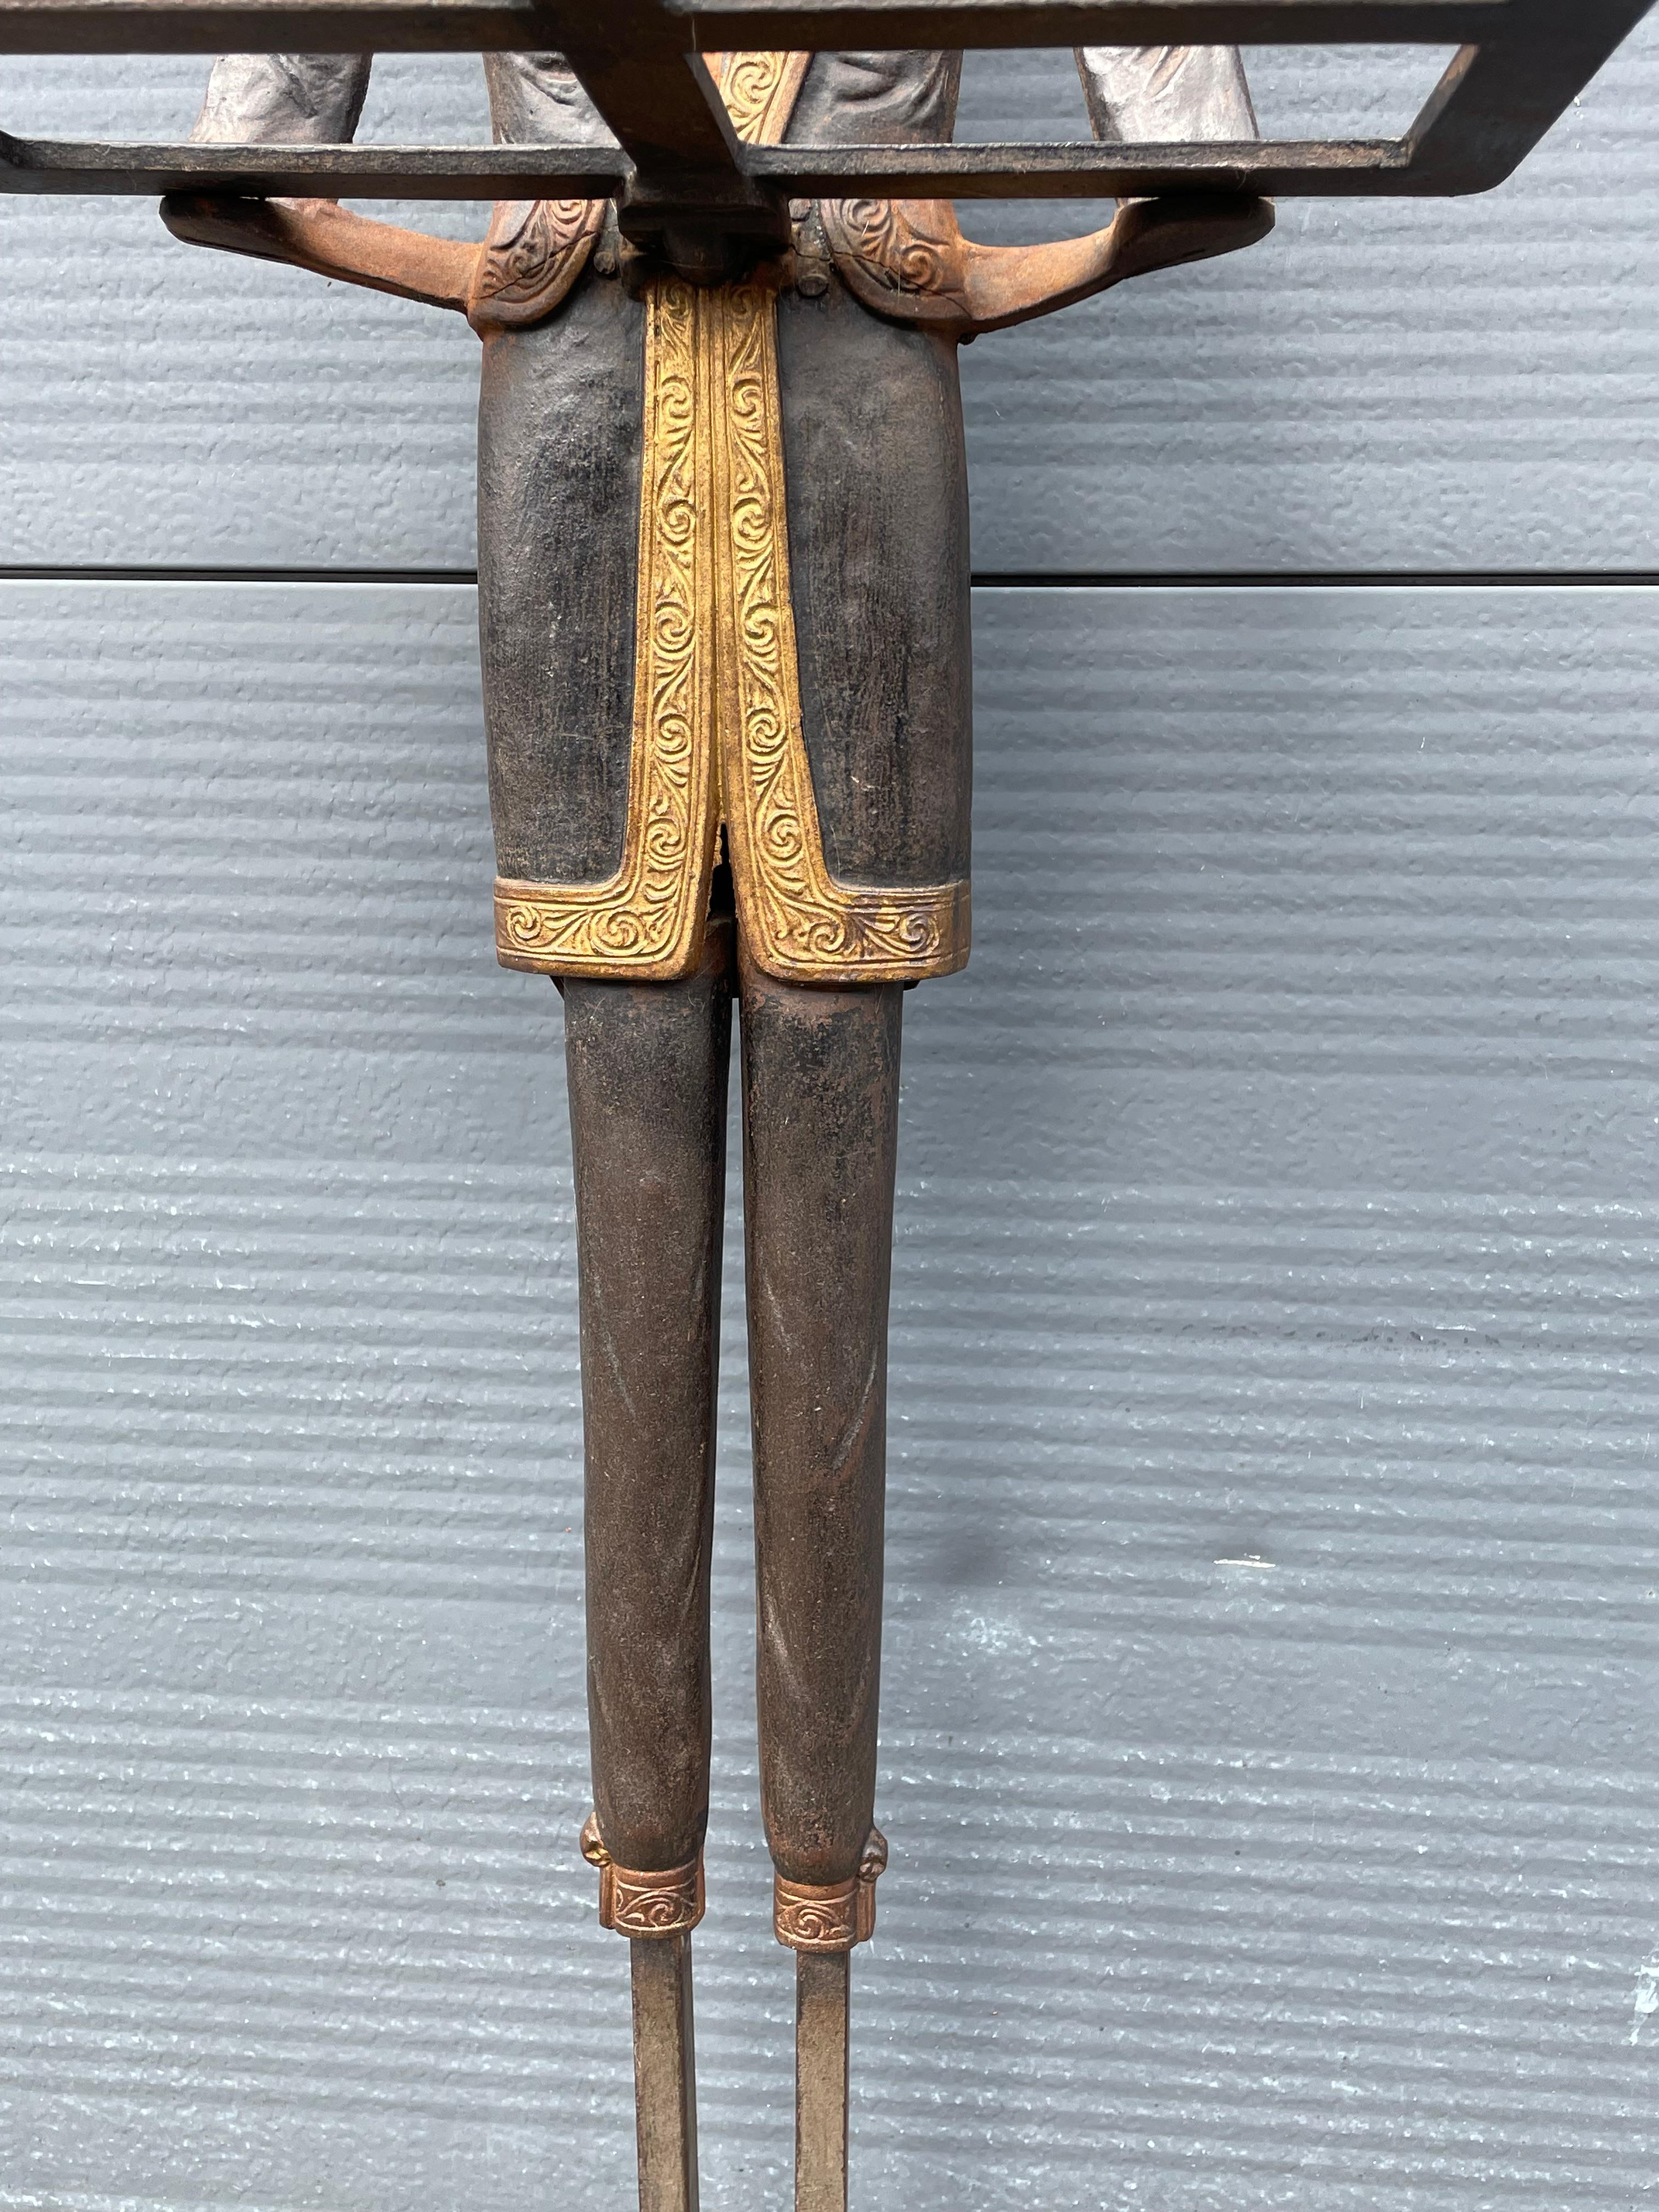 Metal Art Deco Era, Cast Iron Tray or Umbrella Stand w. Painted Servant Sculpture 1920 For Sale